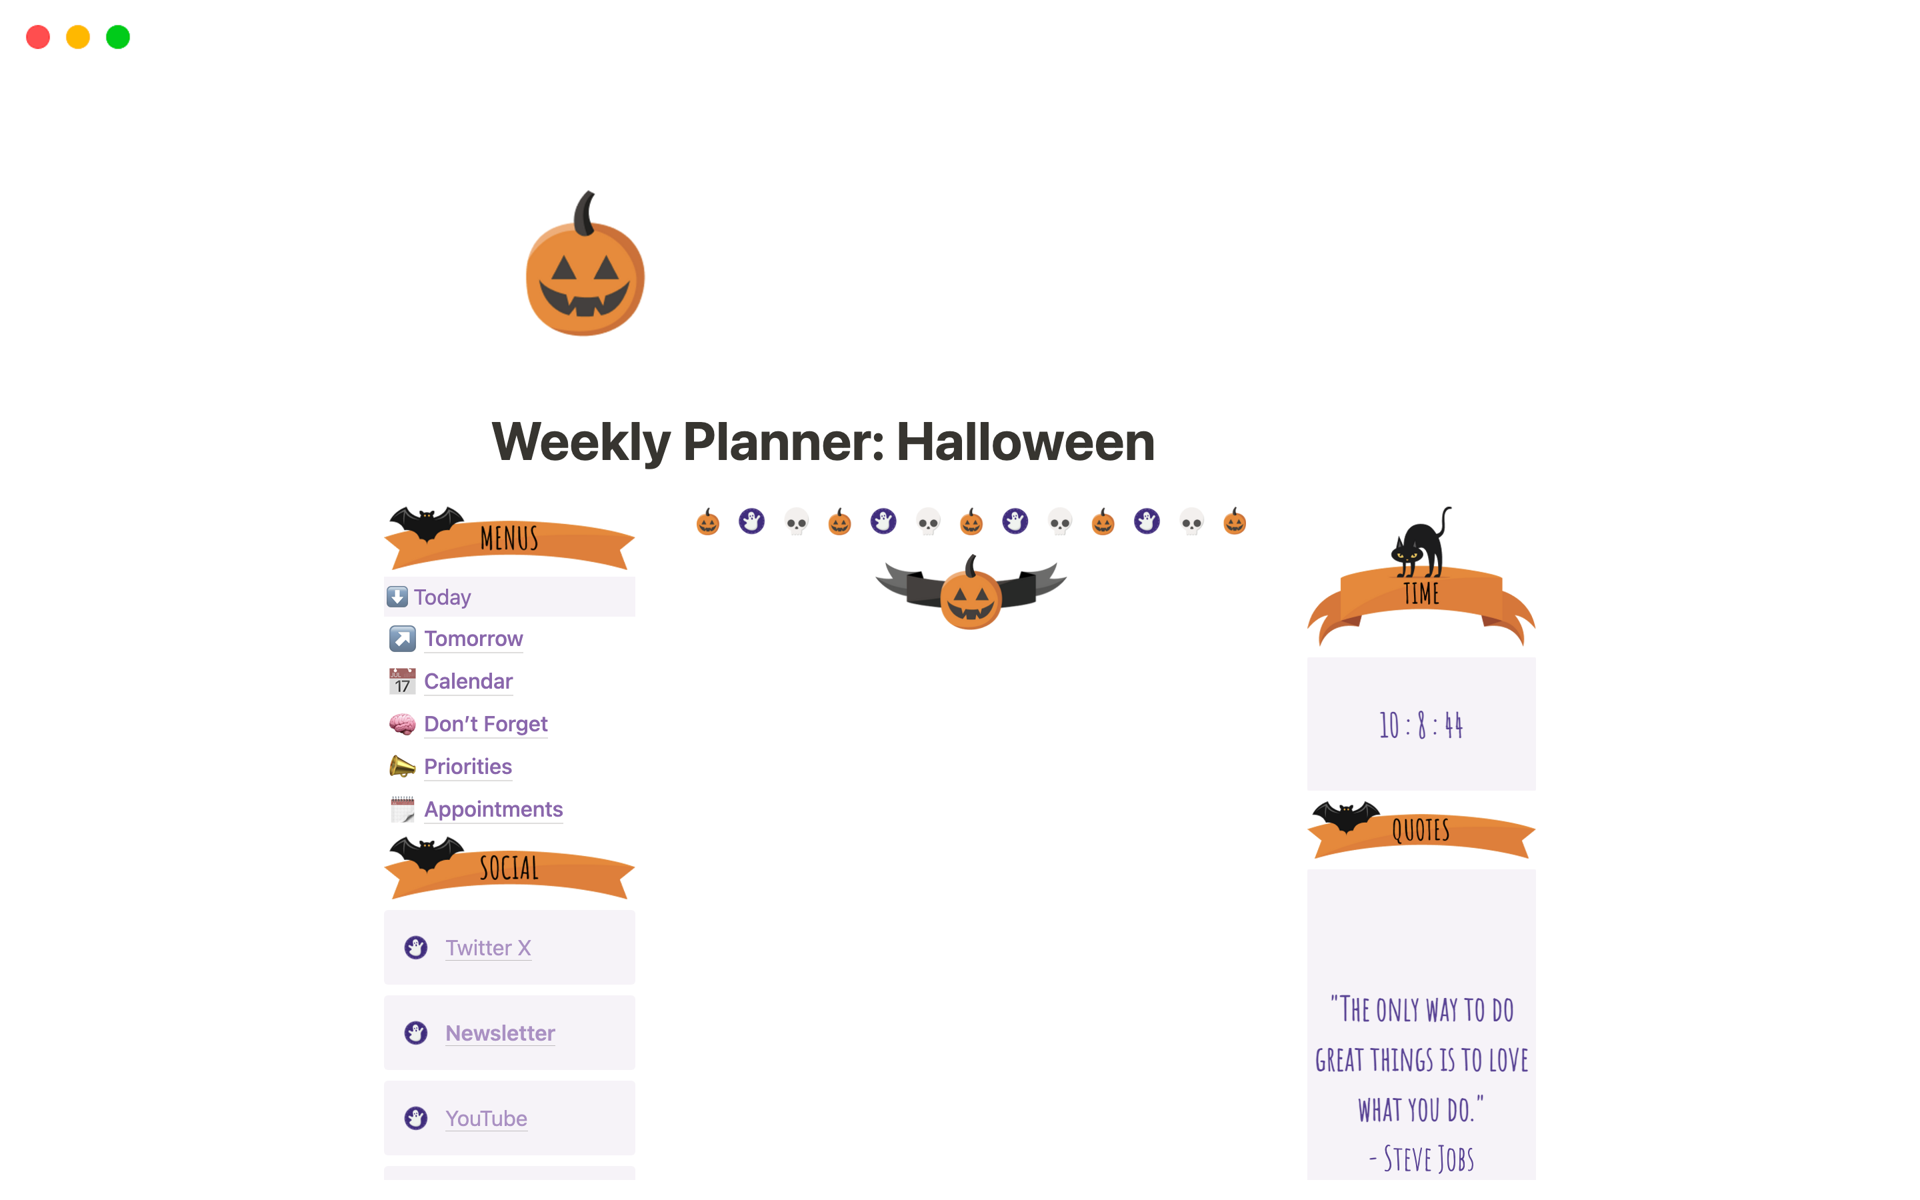 Experience a sweet Notion weekly planner with a Halloween theme.